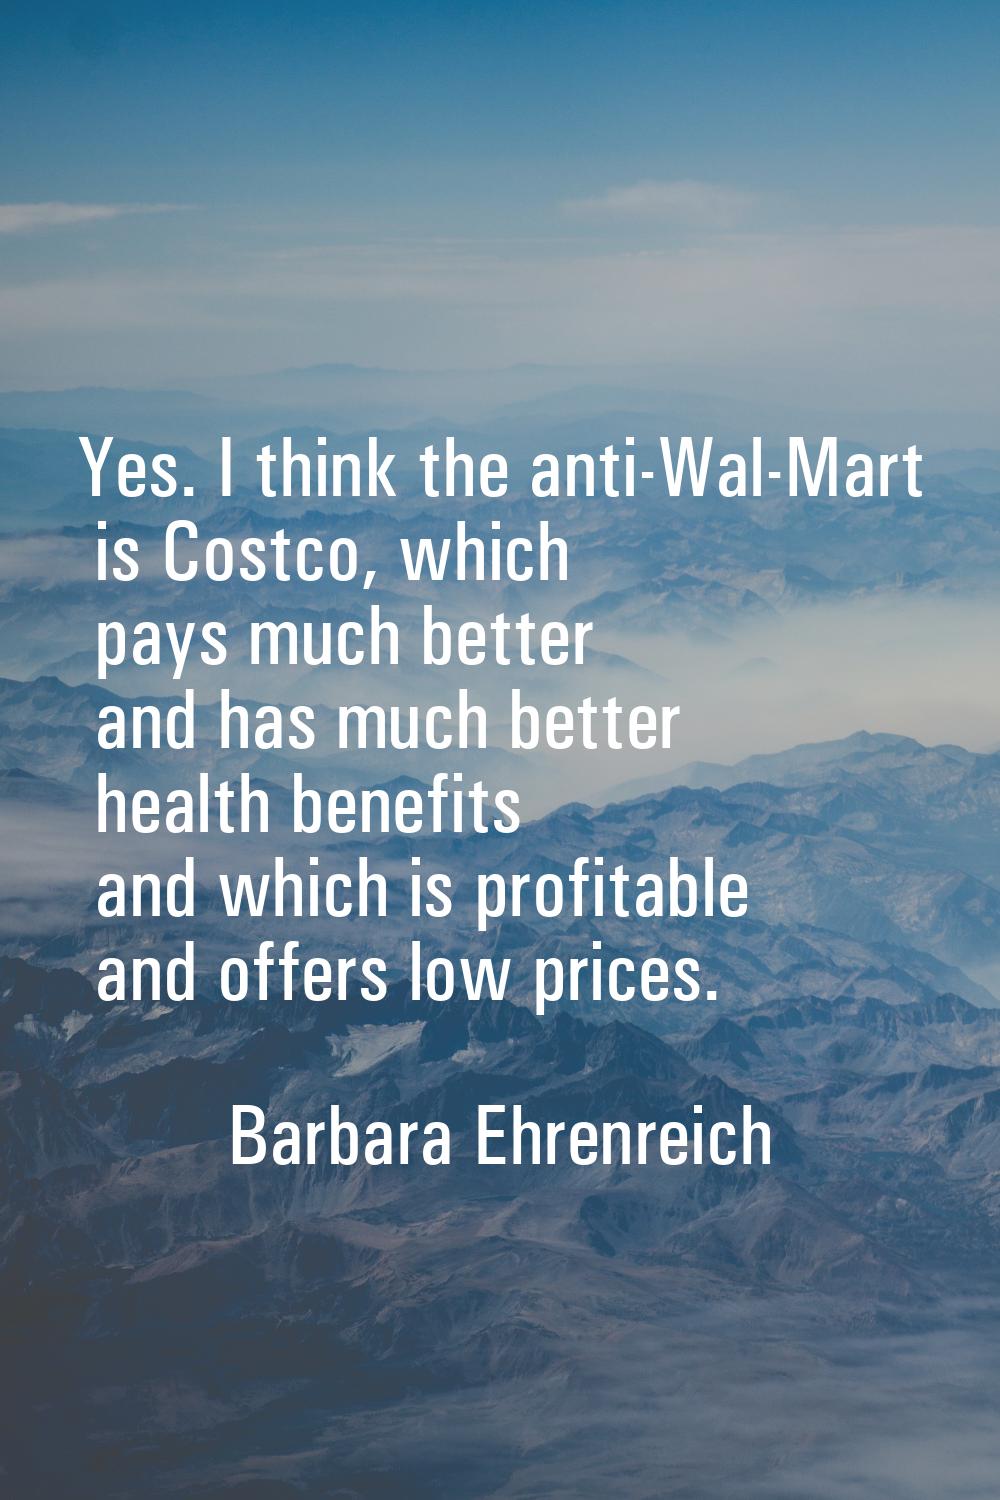 Yes. I think the anti-Wal-Mart is Costco, which pays much better and has much better health benefit